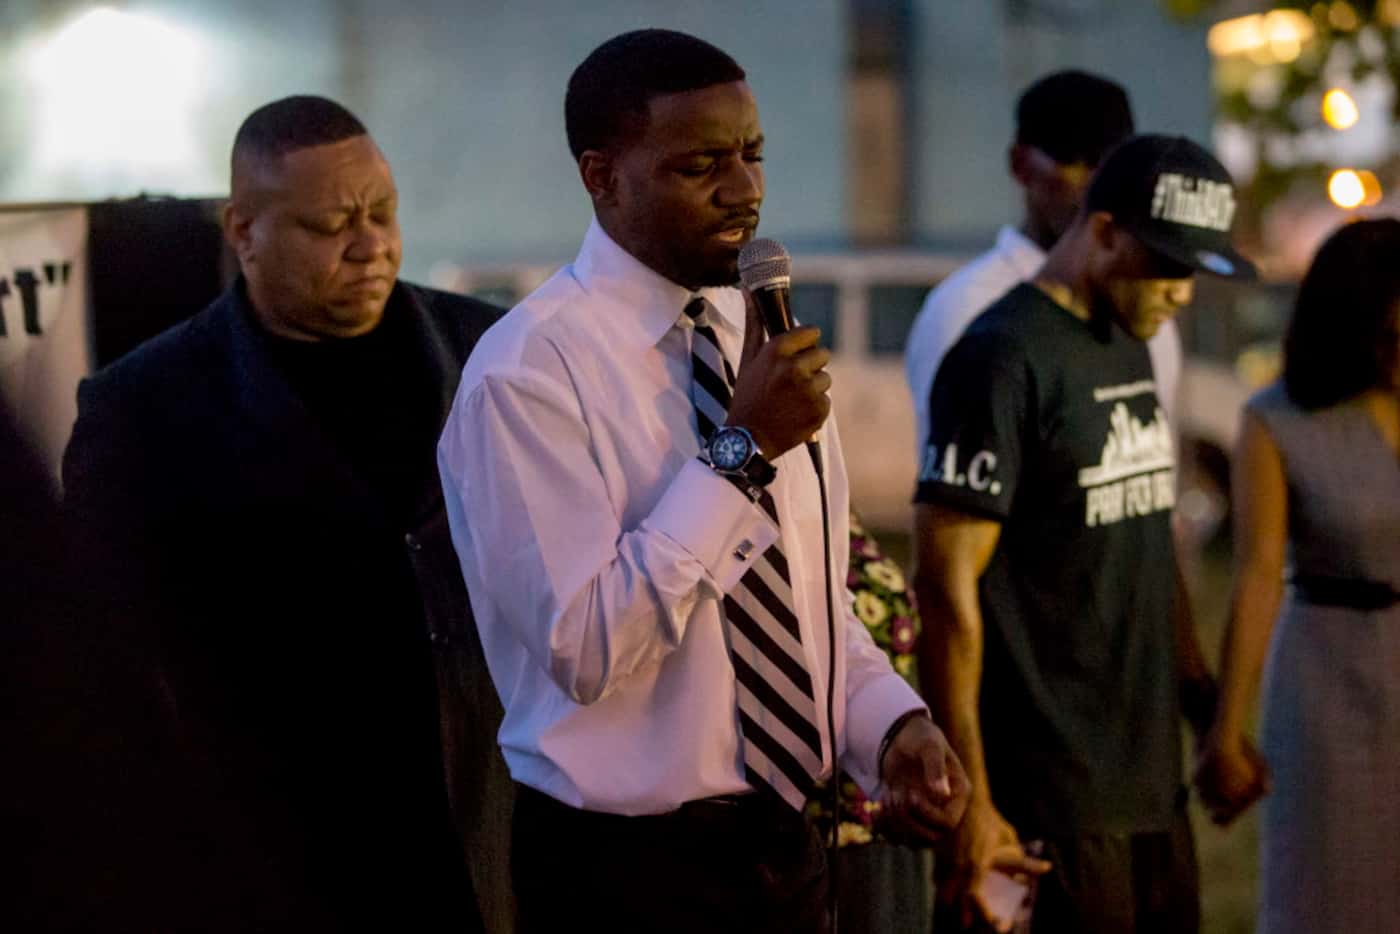 Dominique Alexander, president and founder of Next Generation Action Network, prays during...